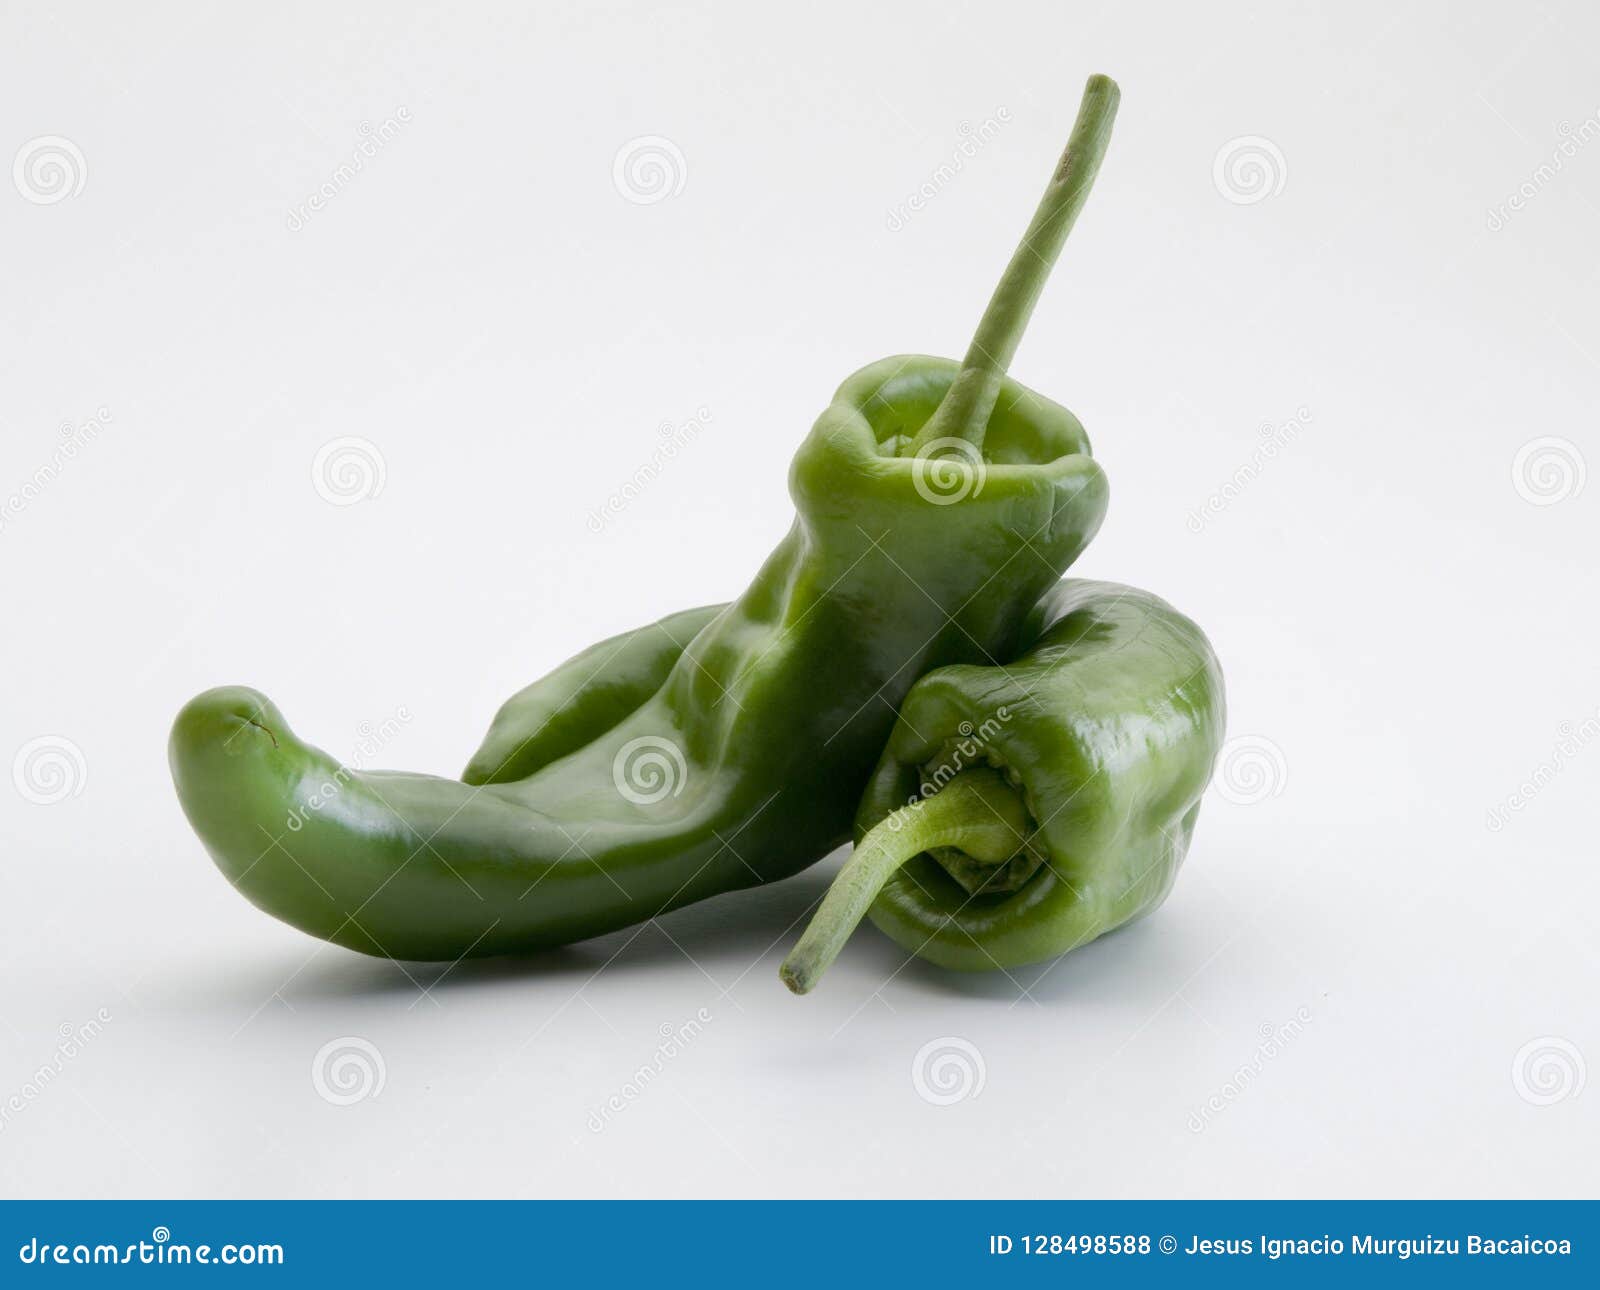 front view of two green peppers from gernika